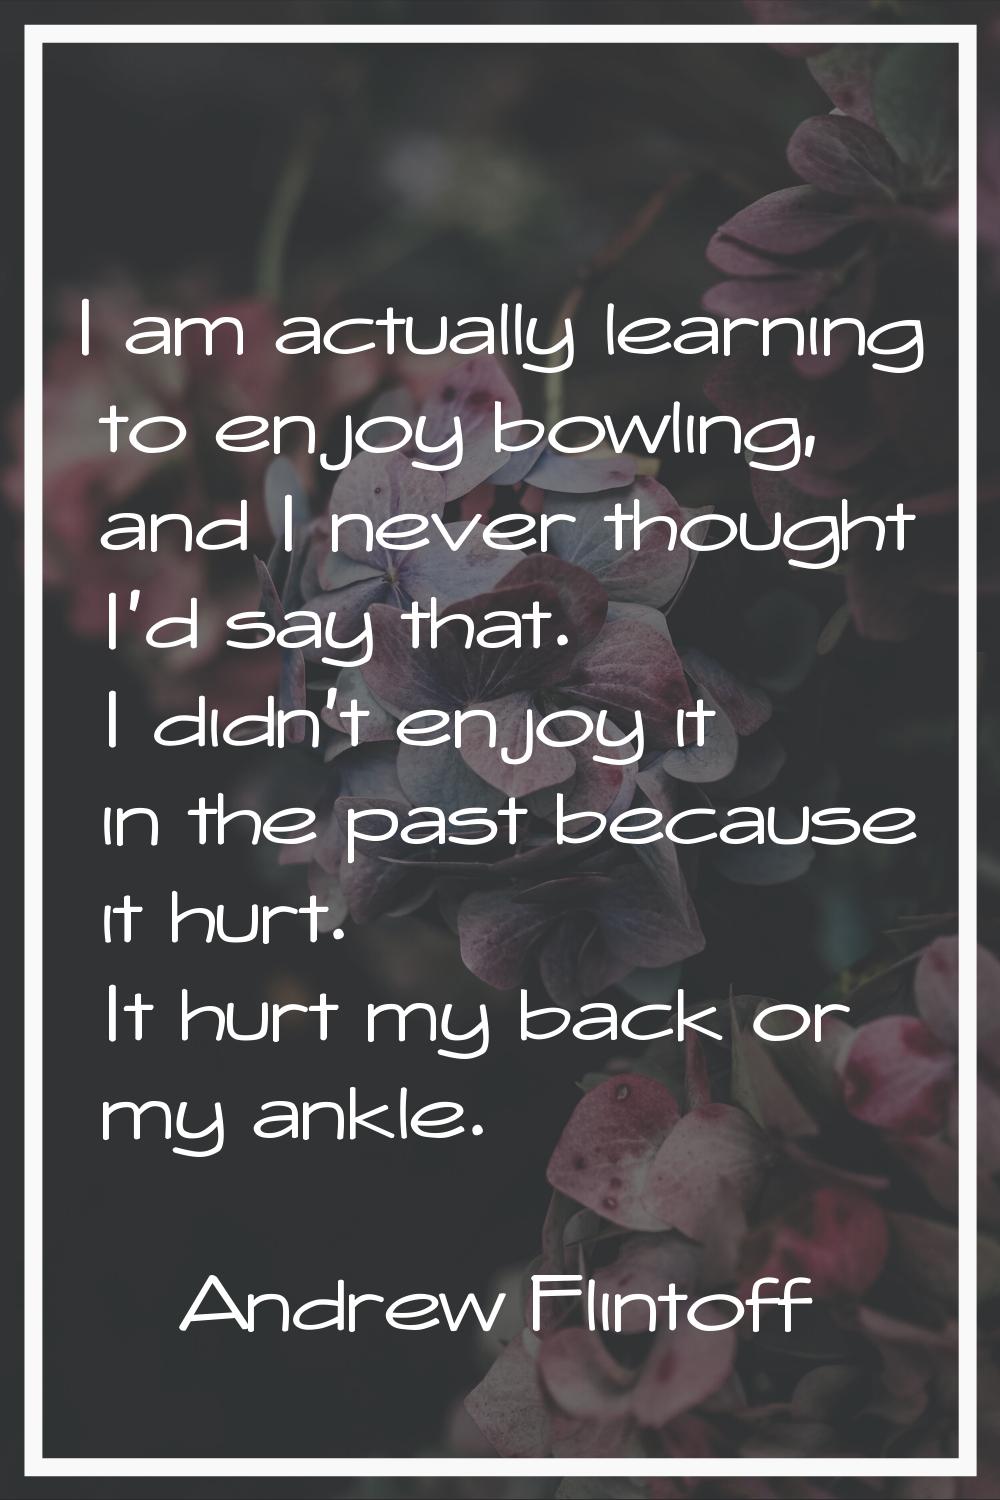 I am actually learning to enjoy bowling, and I never thought I'd say that. I didn't enjoy it in the